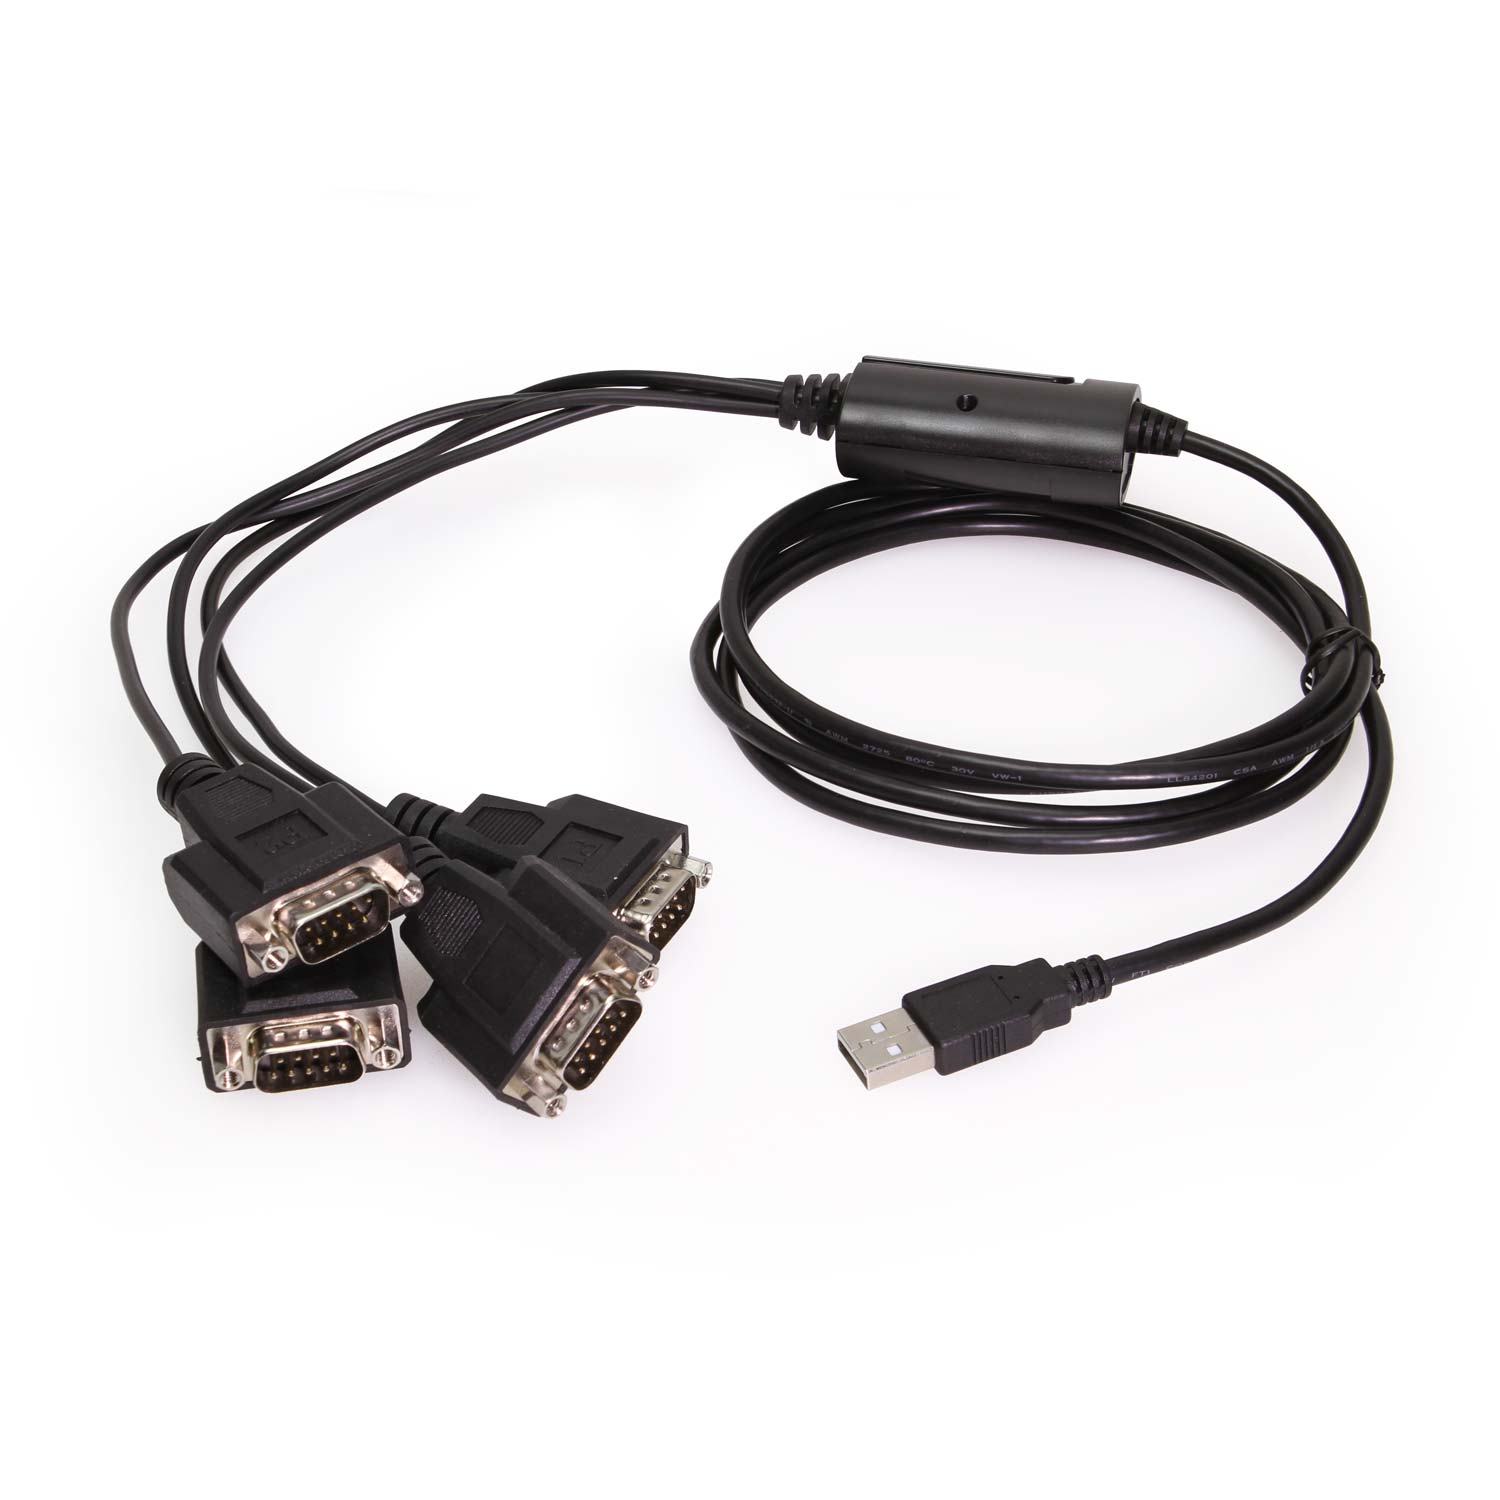 4-Port USB to RS232 Adapter Cable - Coolgear